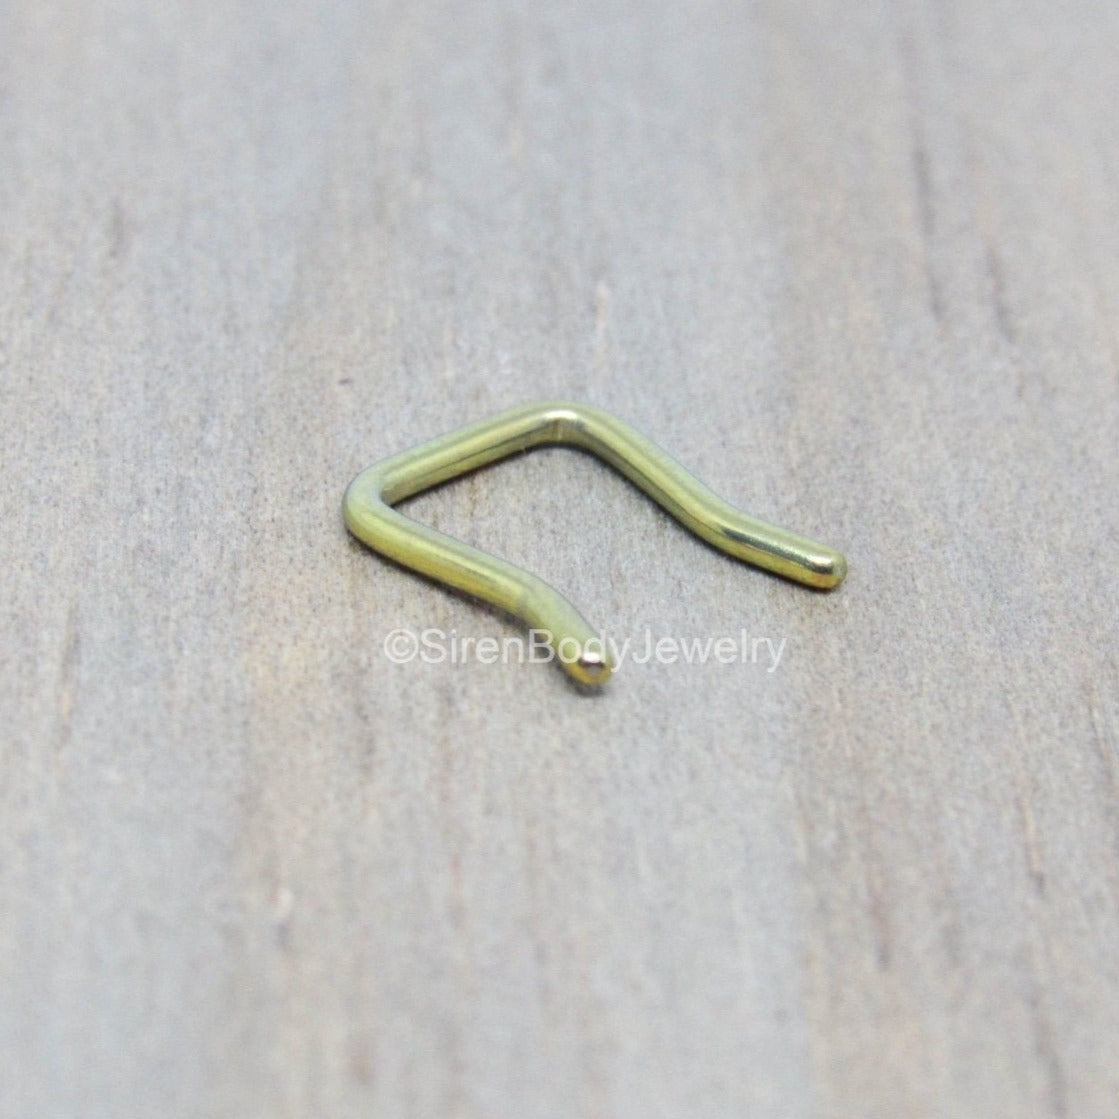 Peek a boo septum ring titanium easy conceal shaped flip up